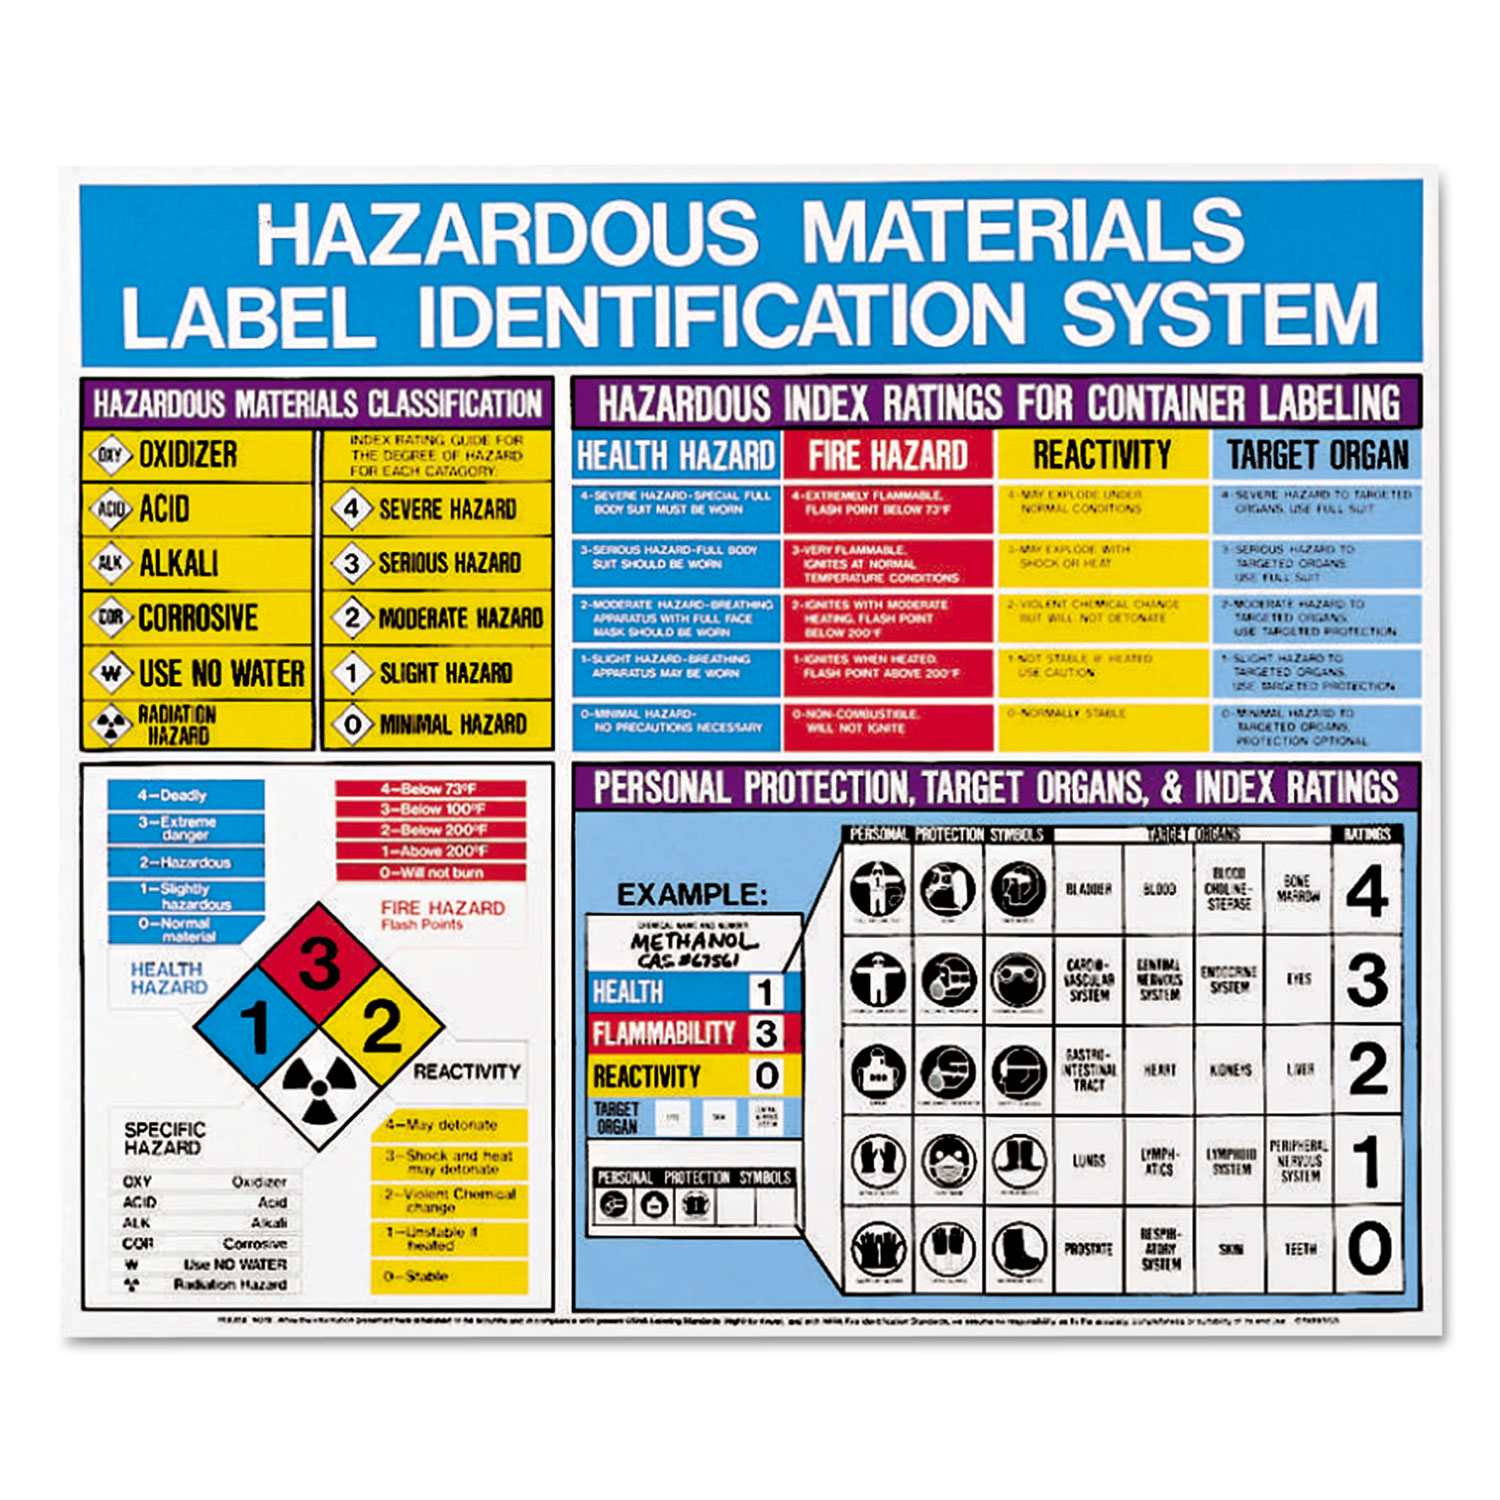 Hazardous Materials Label Identification System Poster by LabelMaster